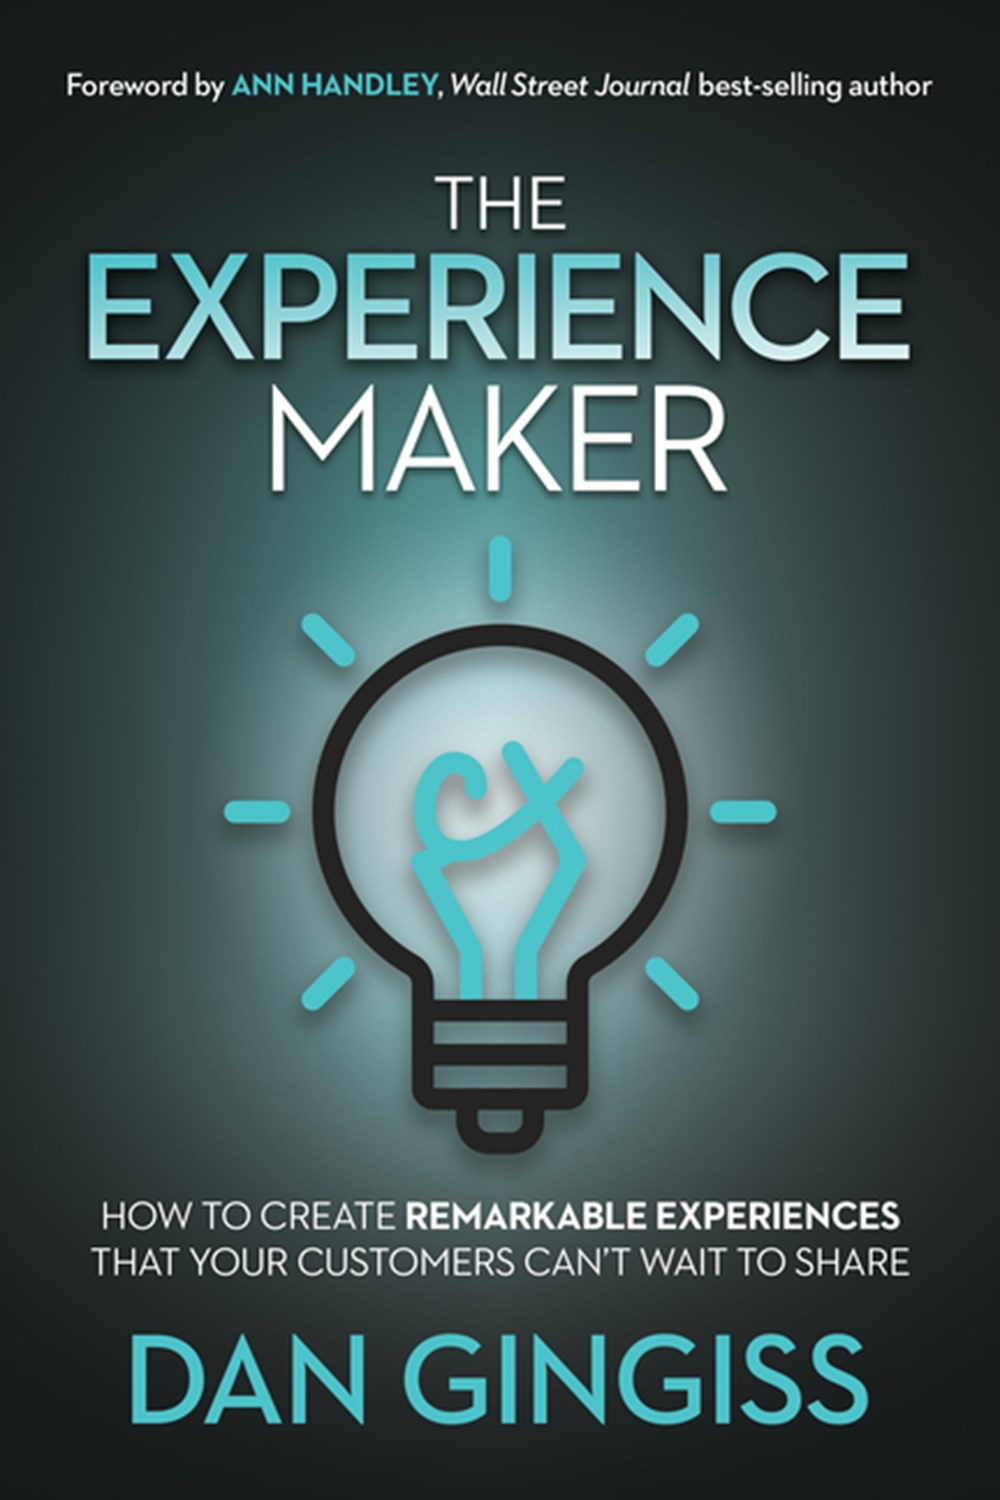 Experience Maker: How to Create Remarkable Experiences That Your Customers Can't Wait to Share